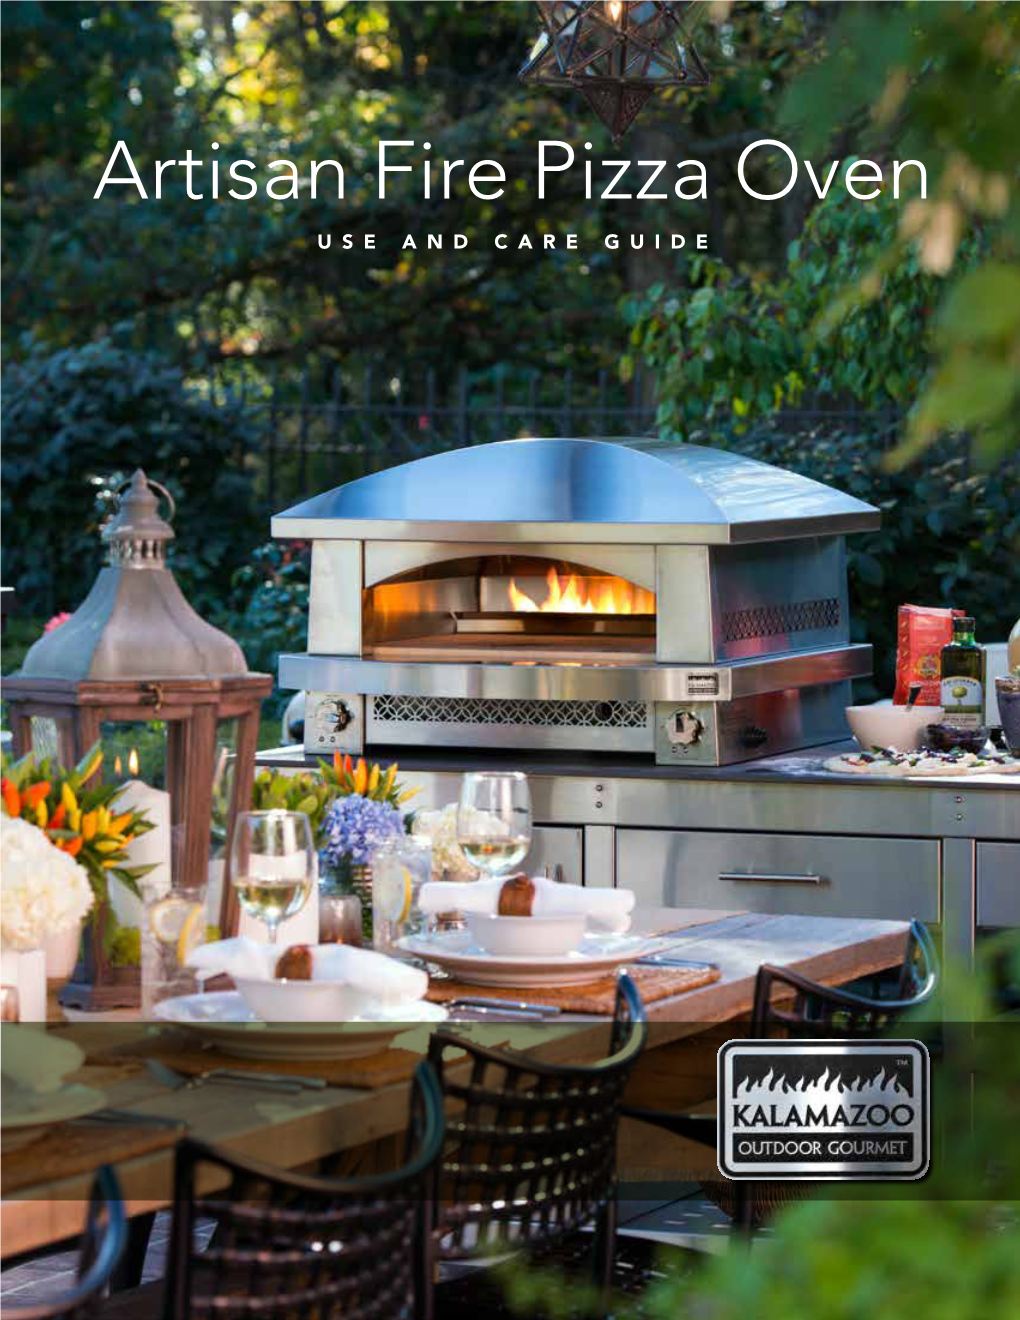 Artisan Fire Pizza Oven USE and CARE GUIDE